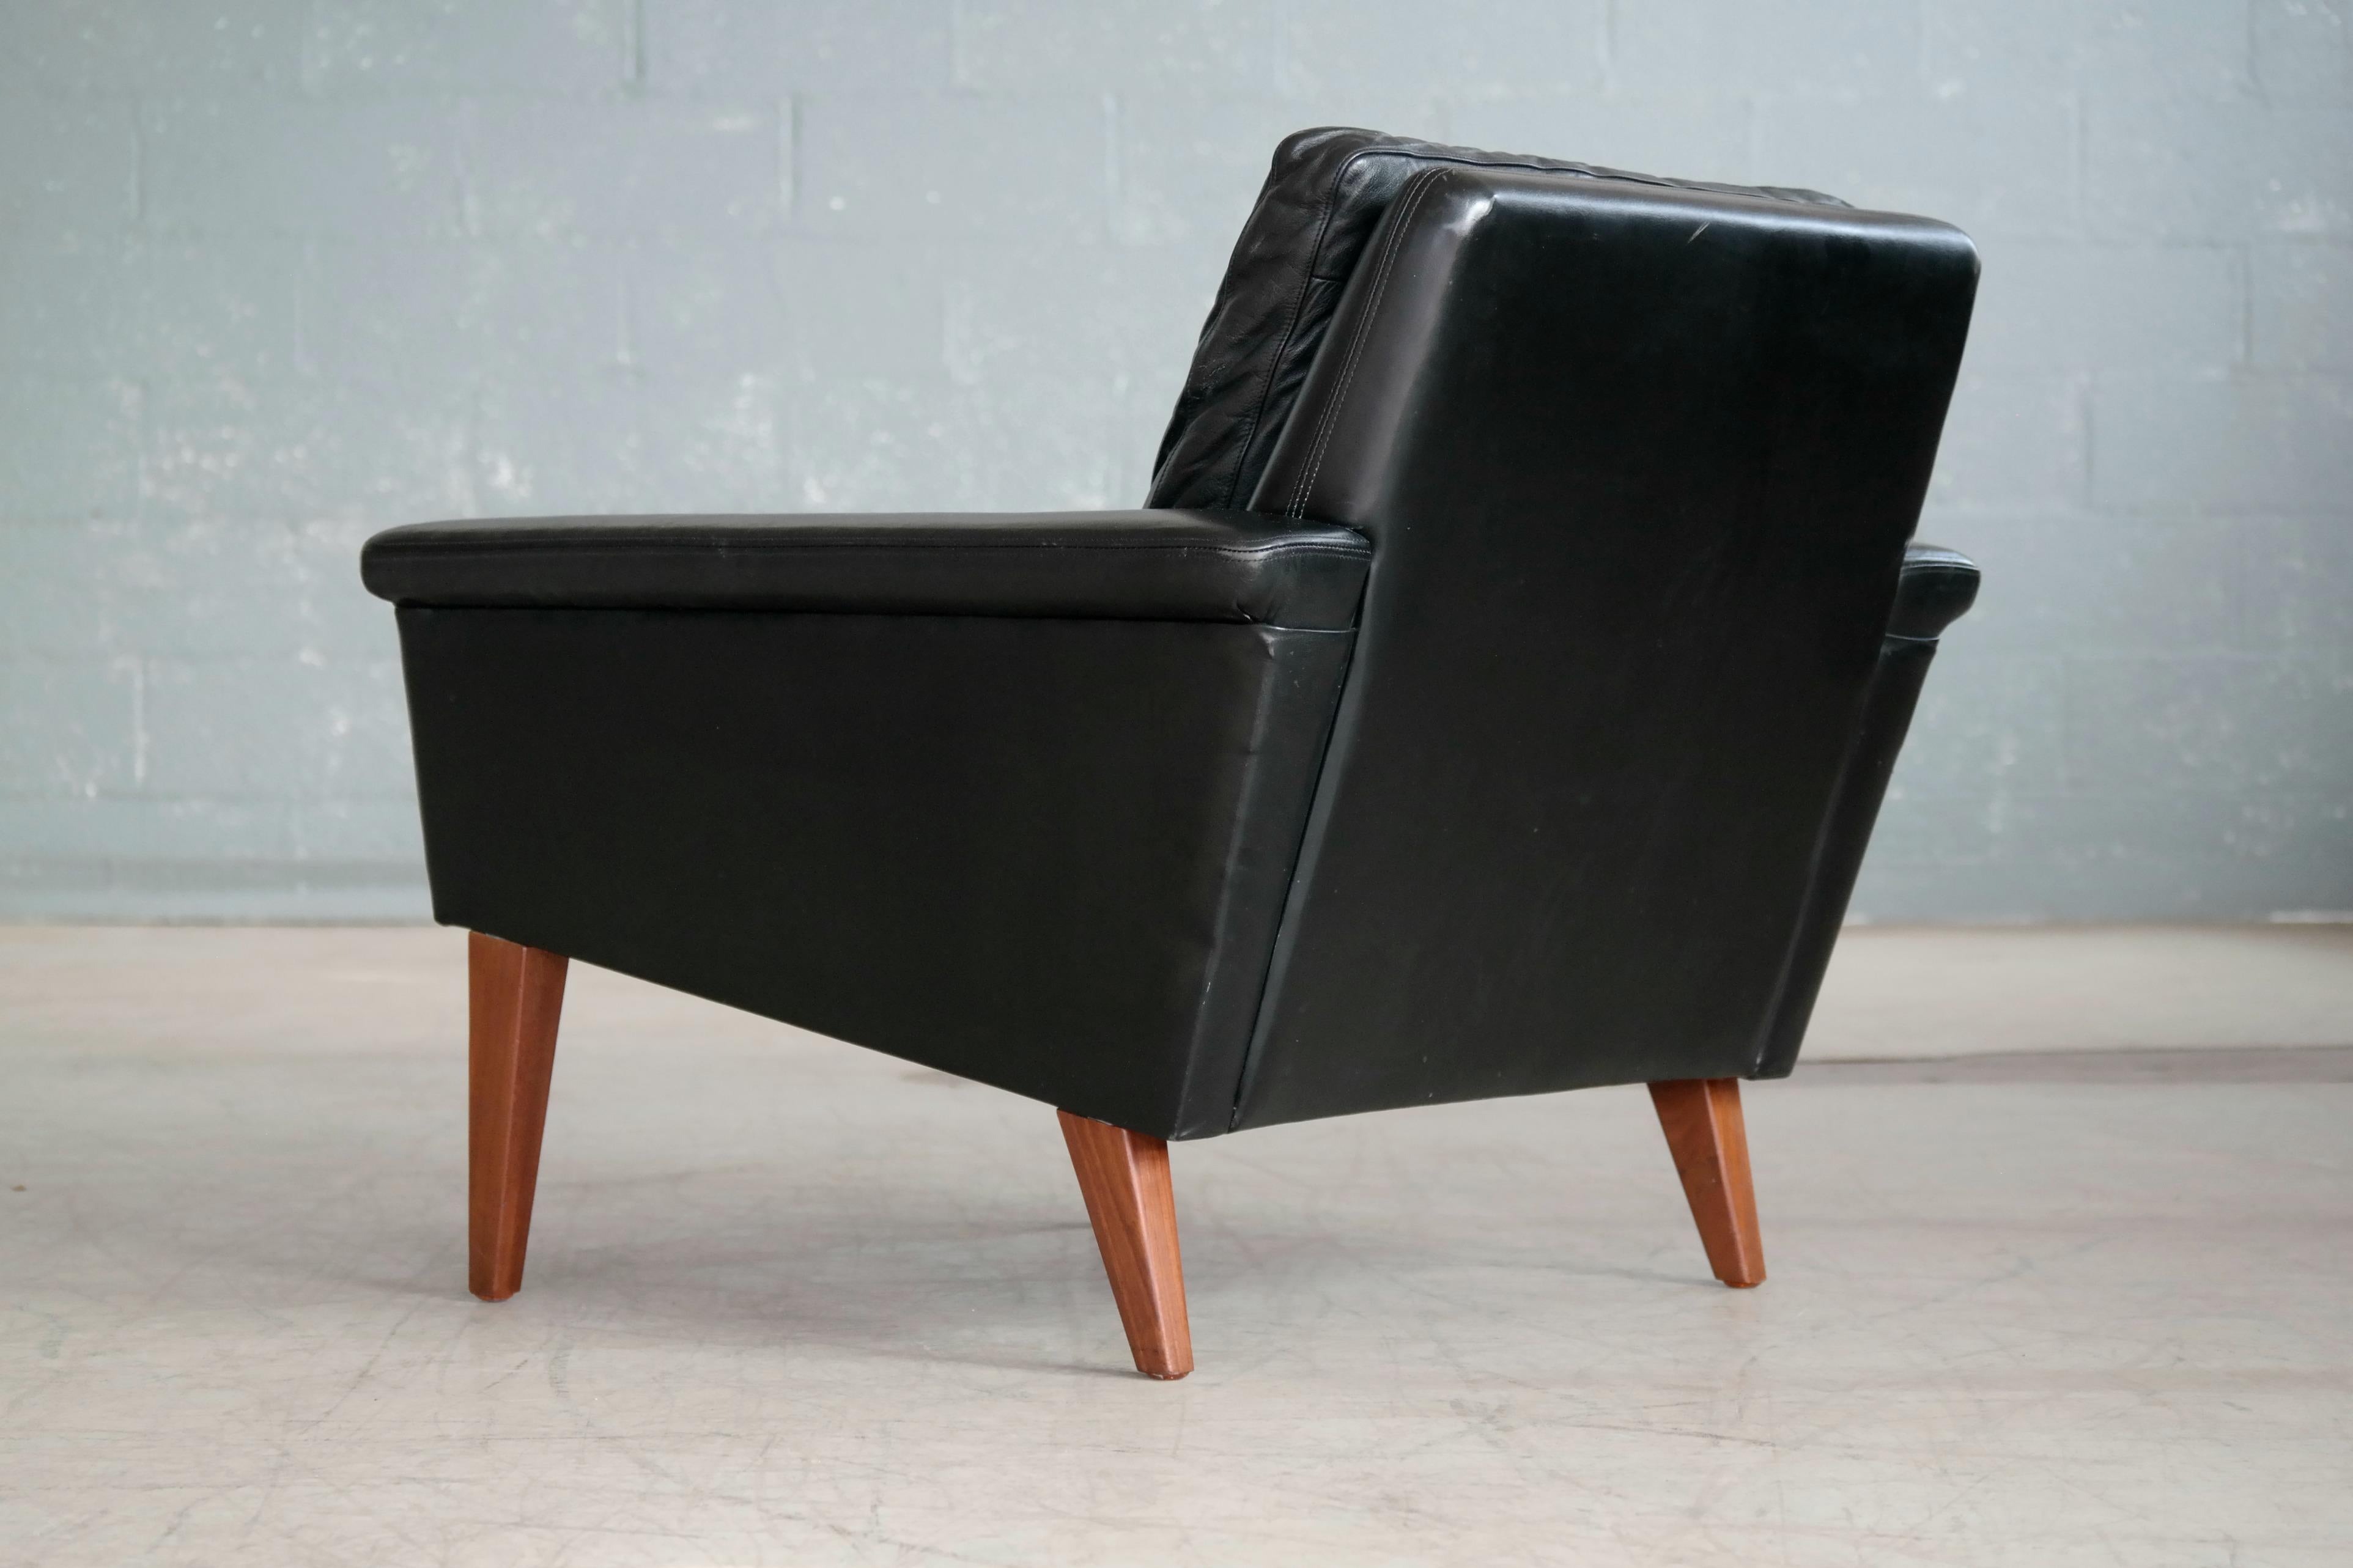 Mid-20th Century Danish Modern Easy Chair in Leather Attributed to Folke Jansson